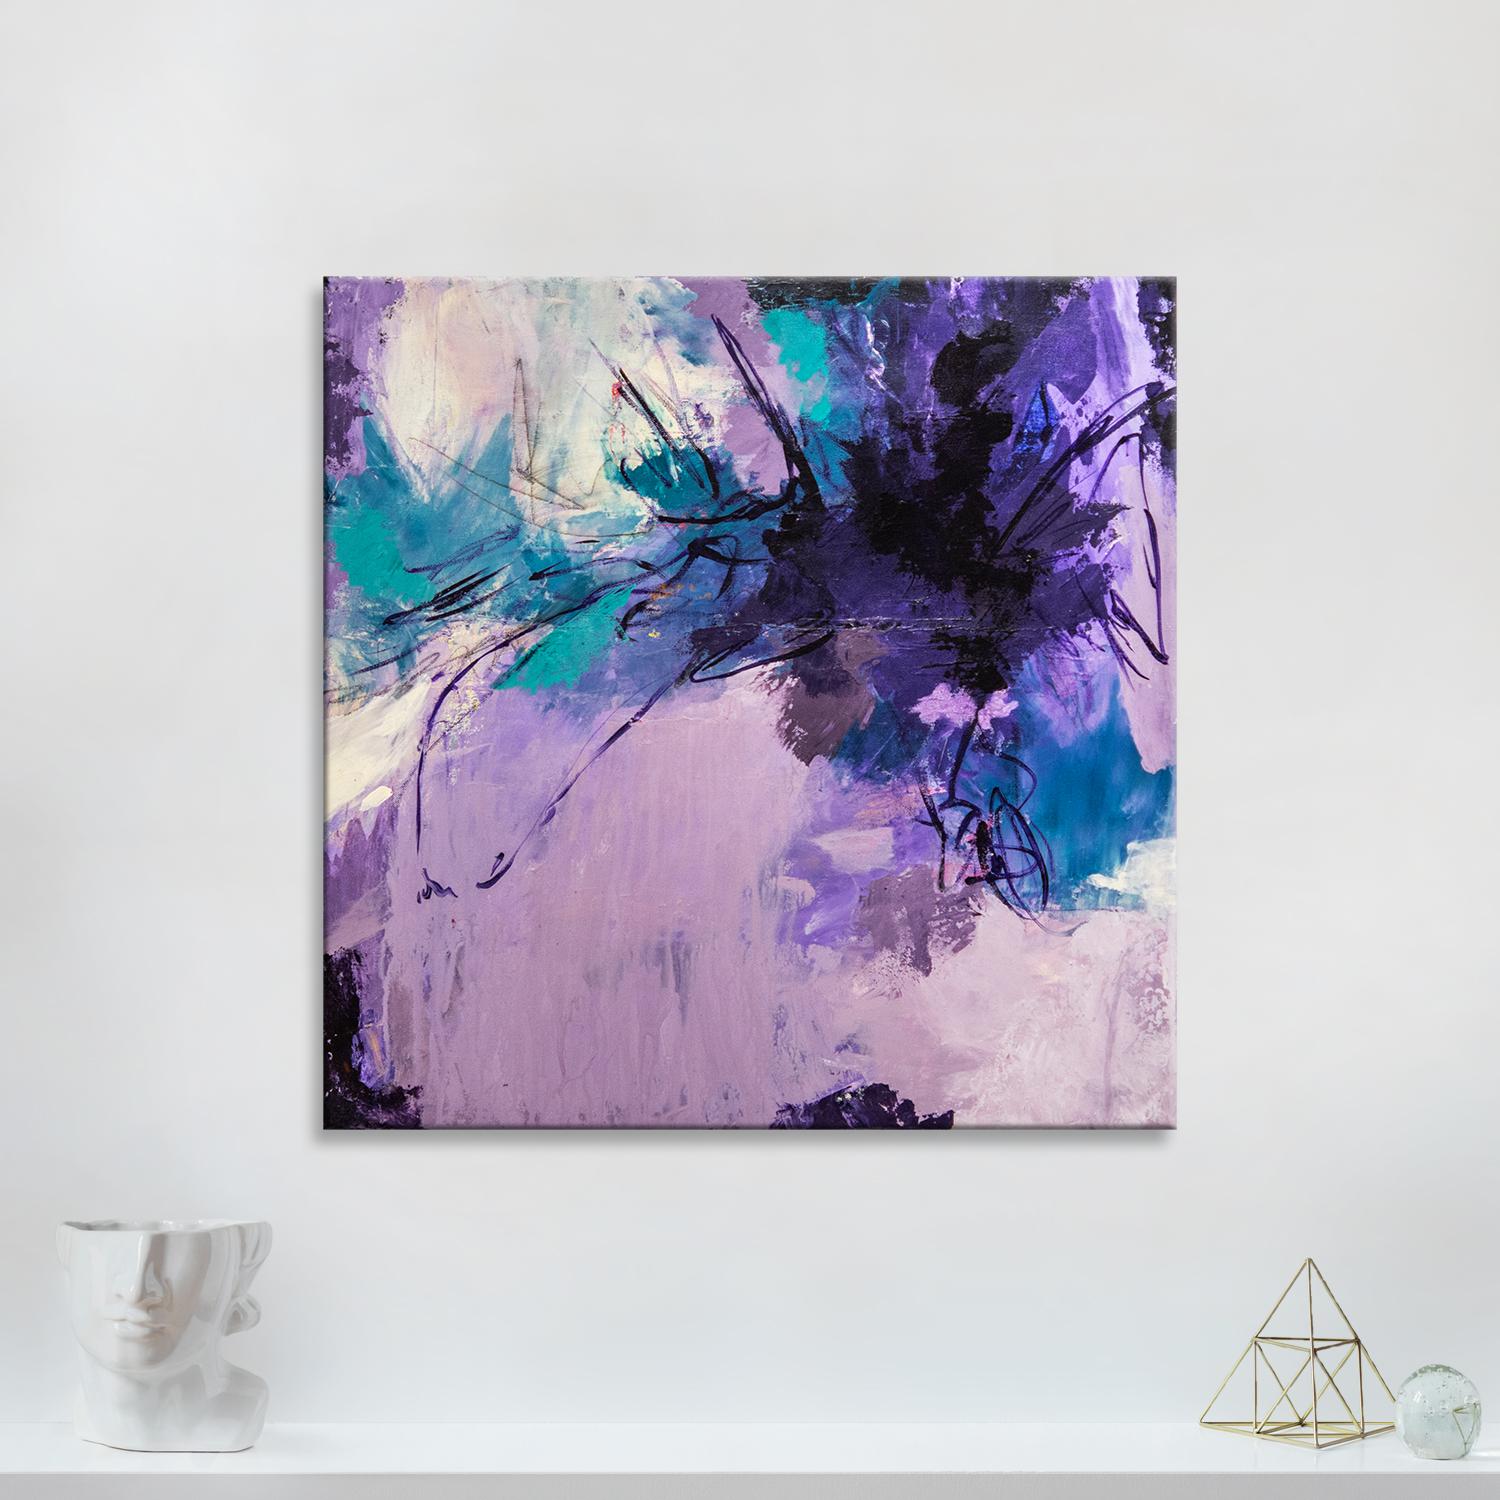 ‘Violet Splash' Wrapped Canvas Original Painting features a vibrant abstract aesthetic in tones of purple, blue, beige, turquoise and beige. Inspired by nature and Bible verse Samuel 1:11, Tammy Keller's positivity and light radiates through her